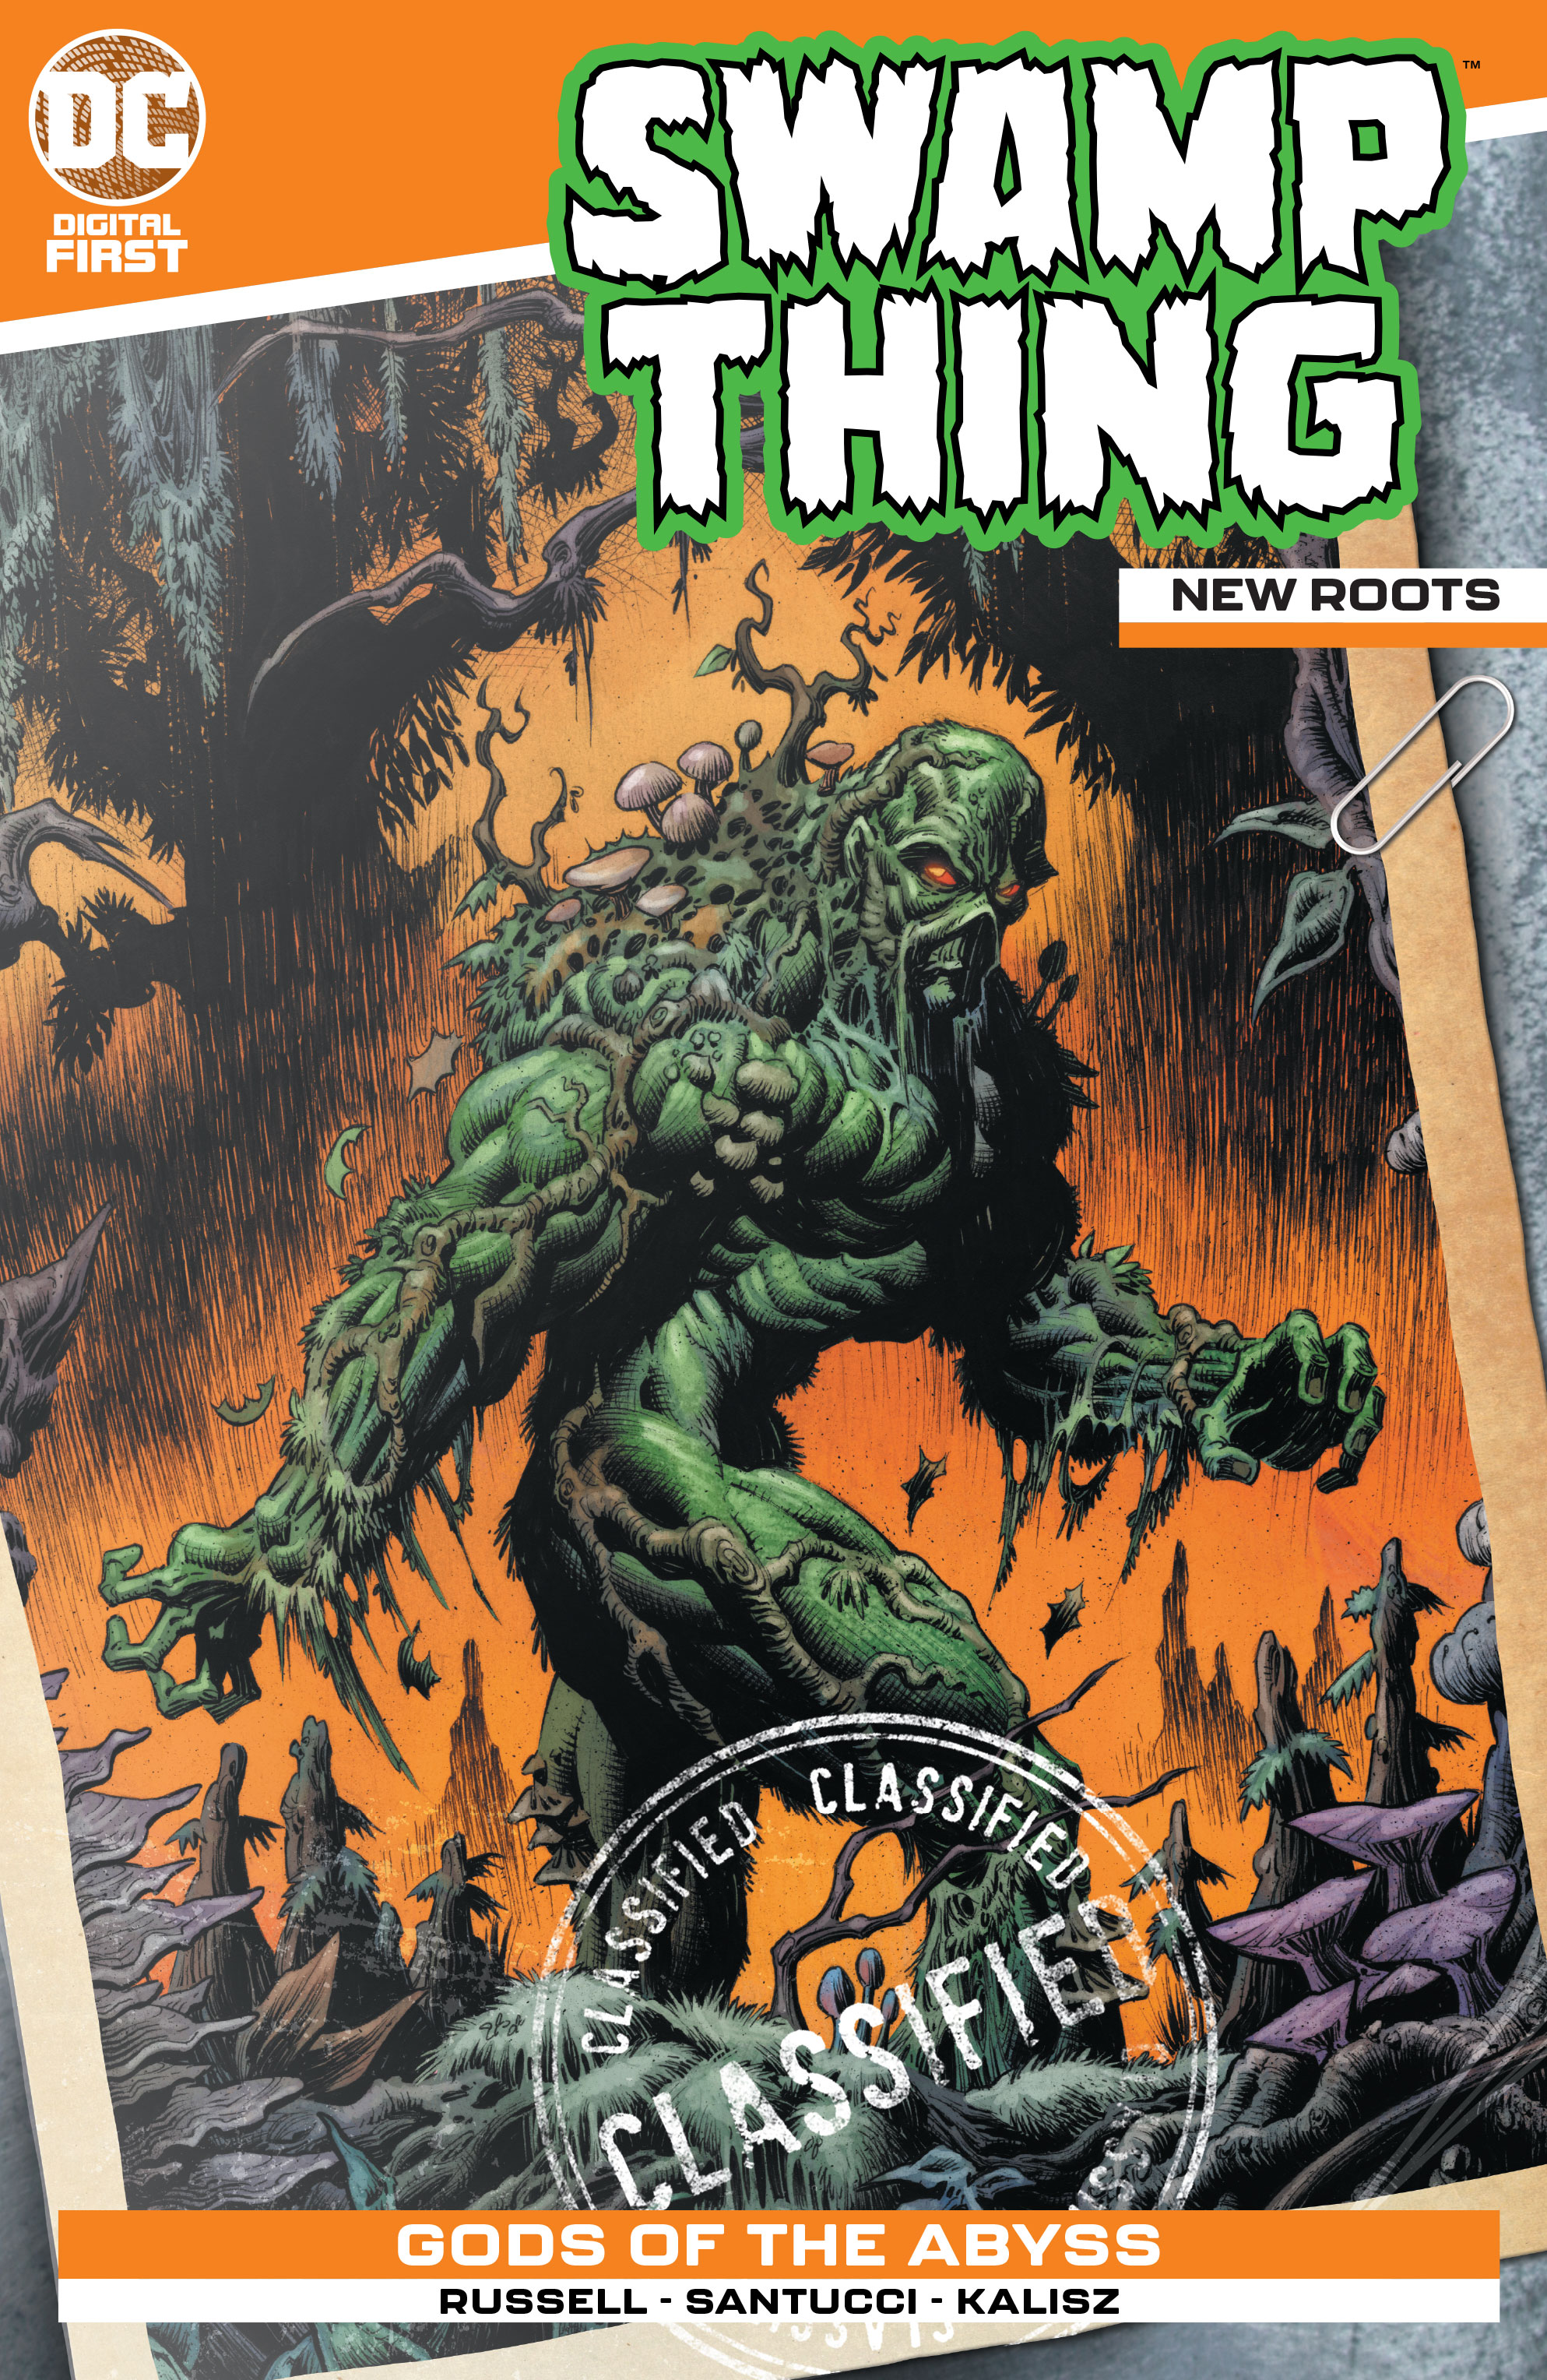 SWAMP-THING-NEW-ROOTS-Cv3